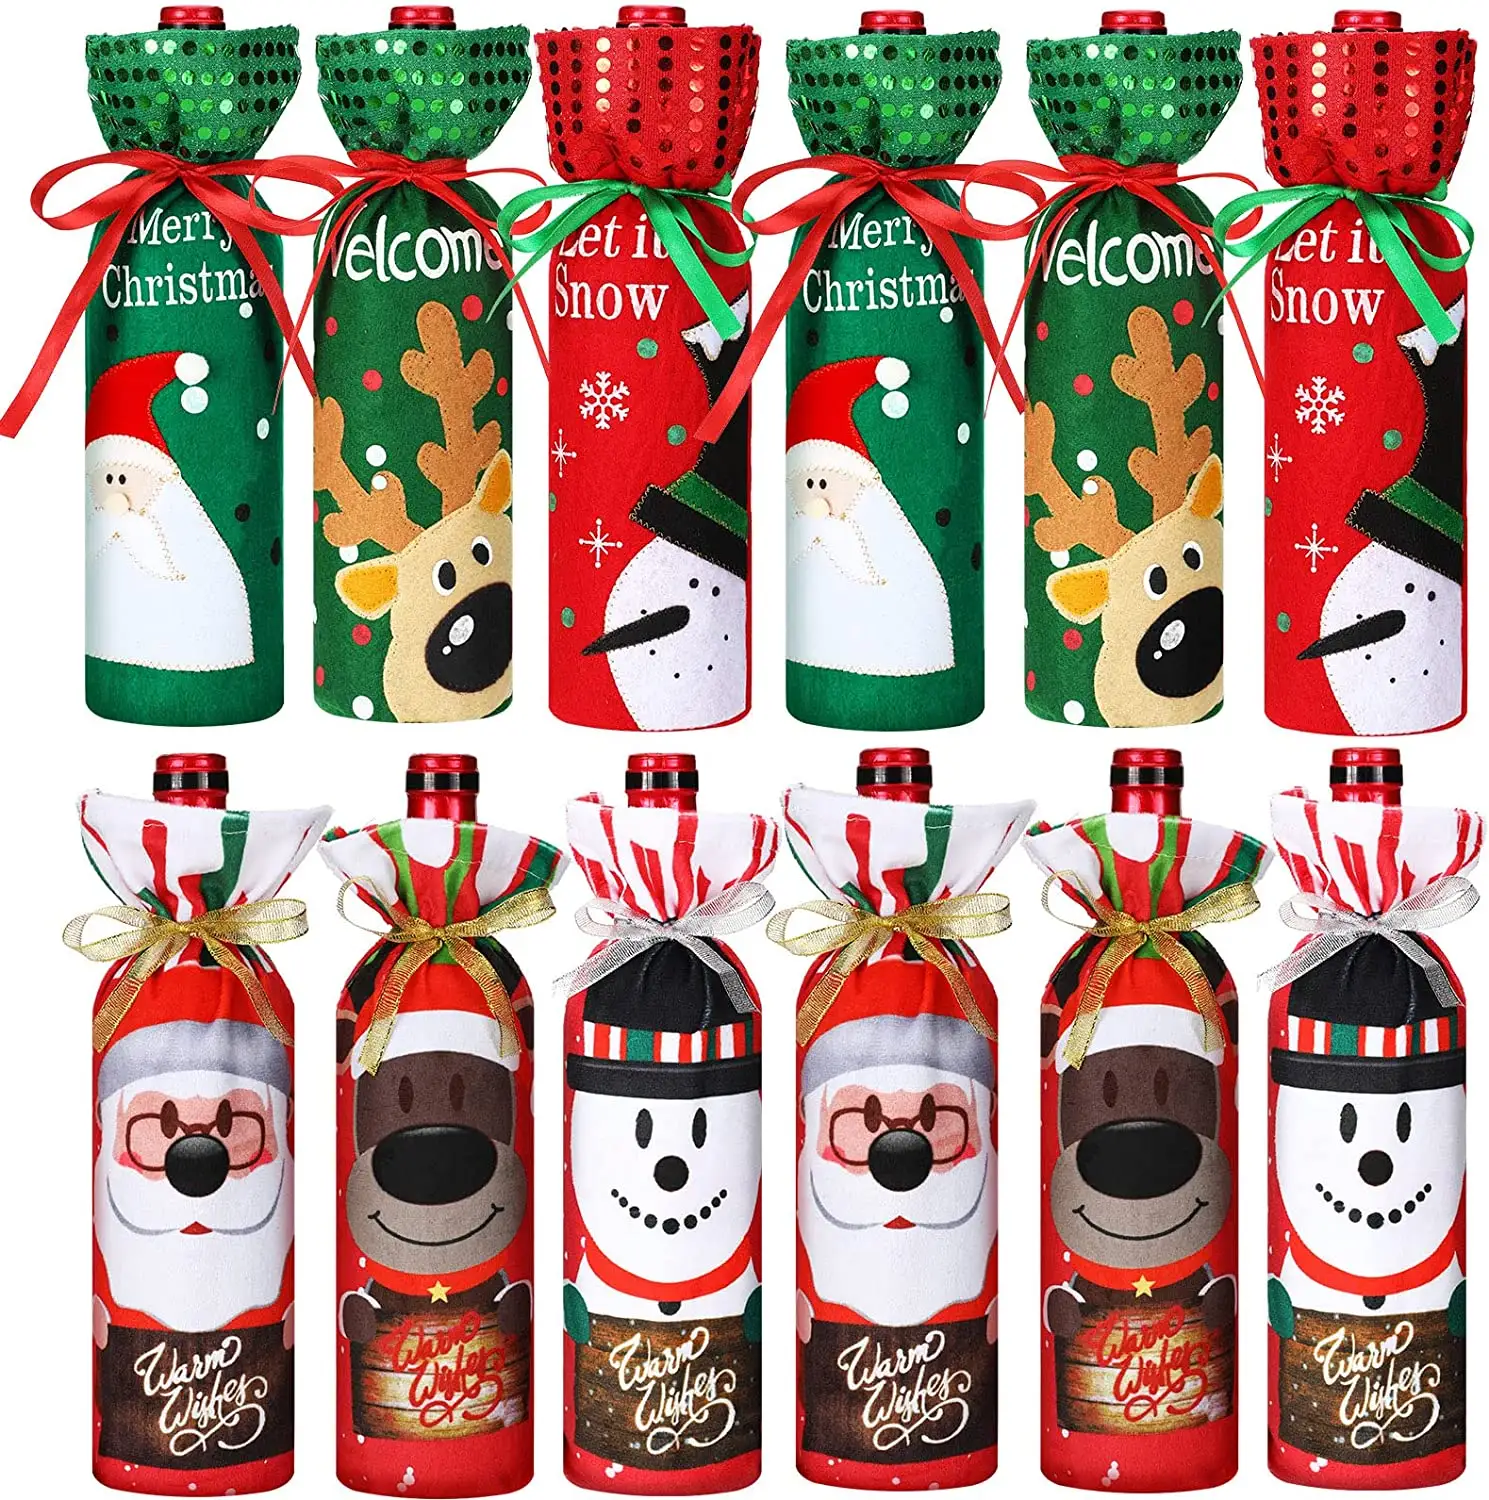 Decorative Christmas Wine Bottle Cover Bags Merry Christmas Decor For Home Christmas Ornaments Xmas Gift New Year's